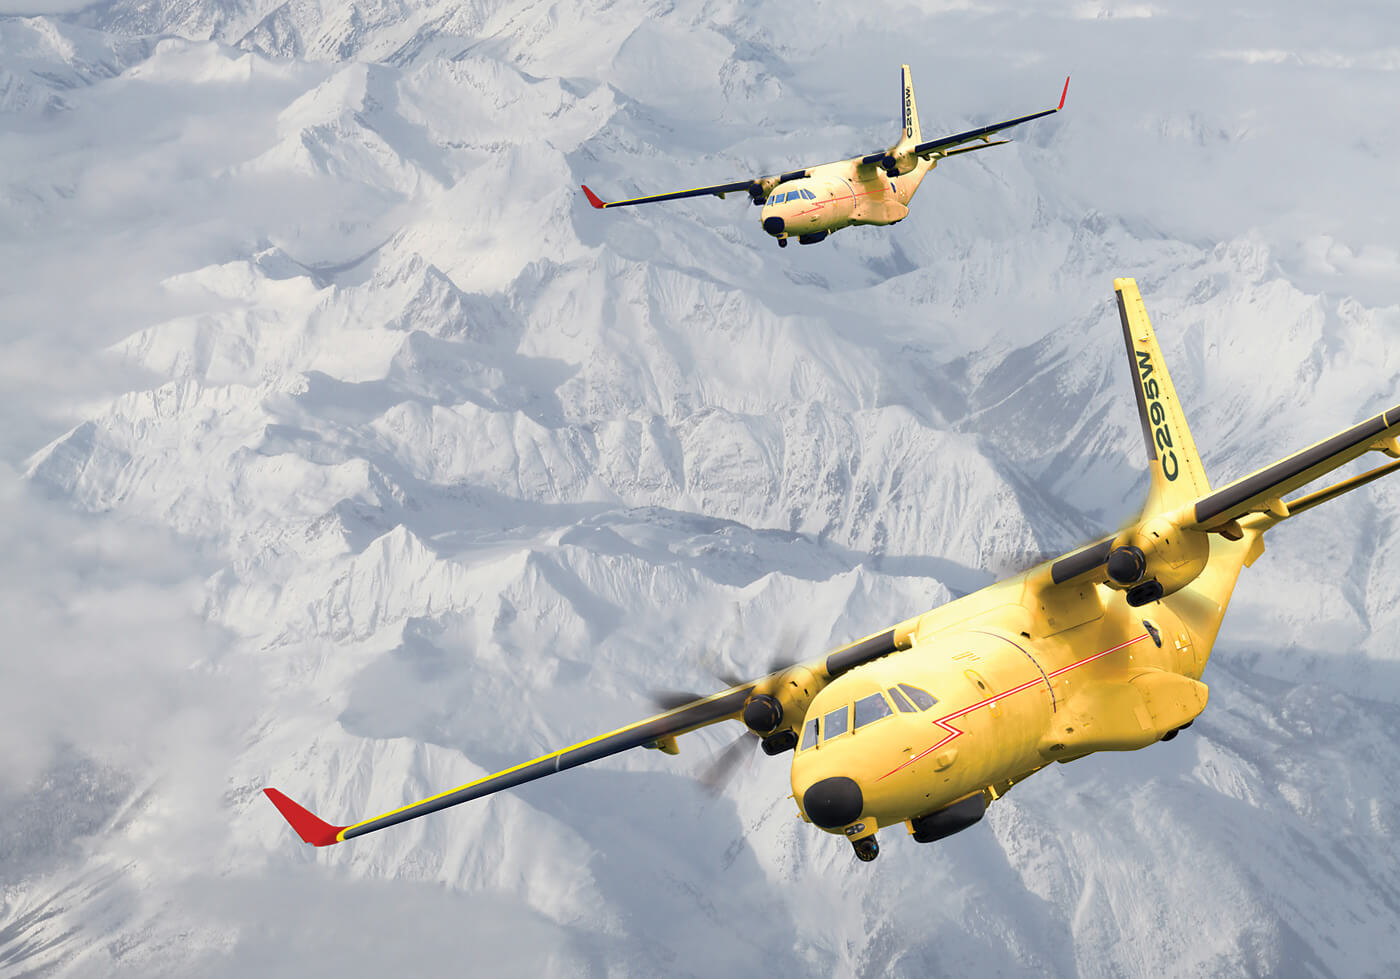 With the announcement that Airbus' C295W will be Canada's next fixed-wing search and rescue platform, the Canadian government concluded a torturous procurement decision that has dragged out over the past 14 years. Airbus Image